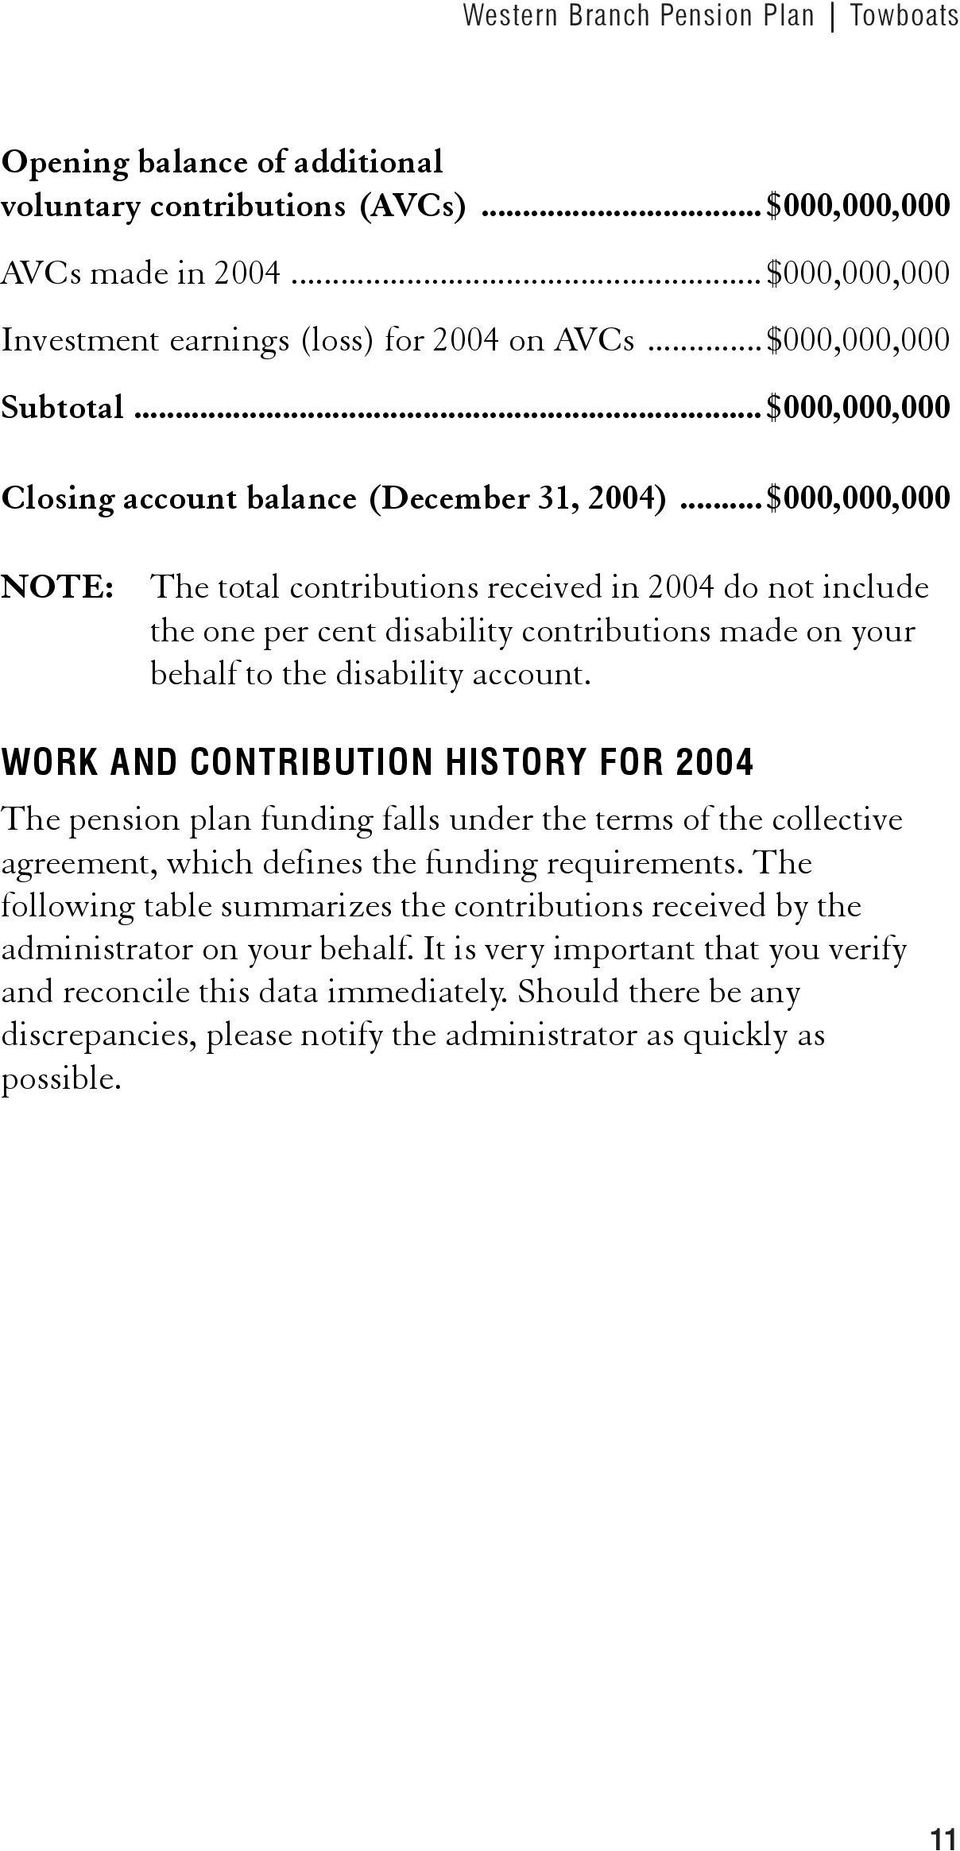 ..$000,000,000 NOTE: The total contributions received in 2004 do not include the one per cent disability contributions made on your behalf to the disability account.